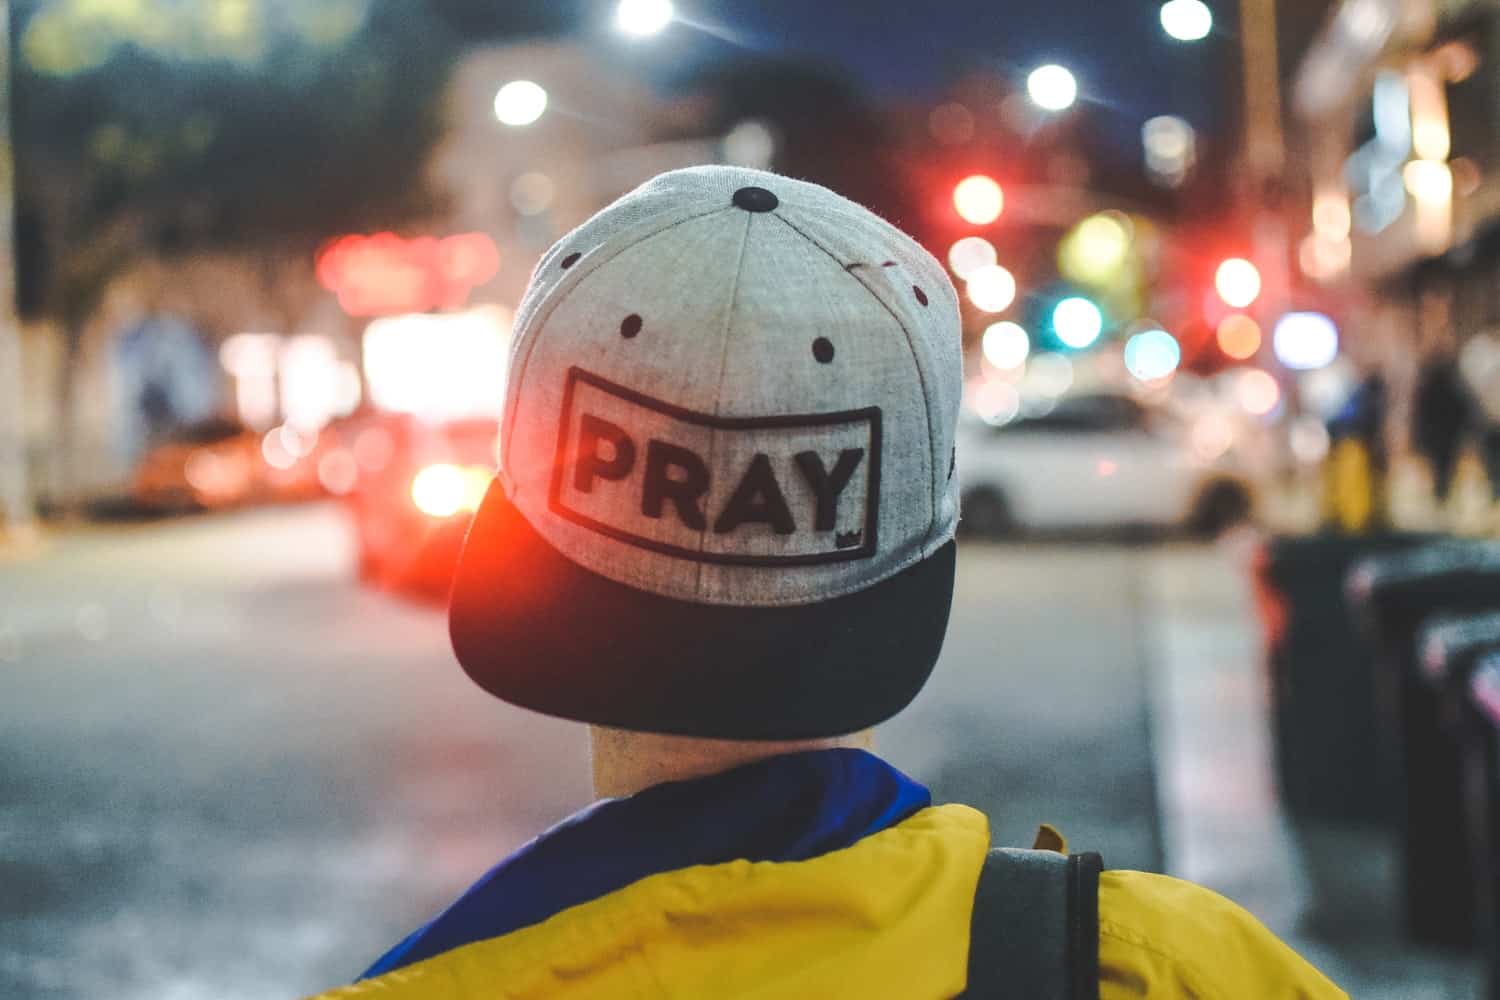 How to Pray without Words